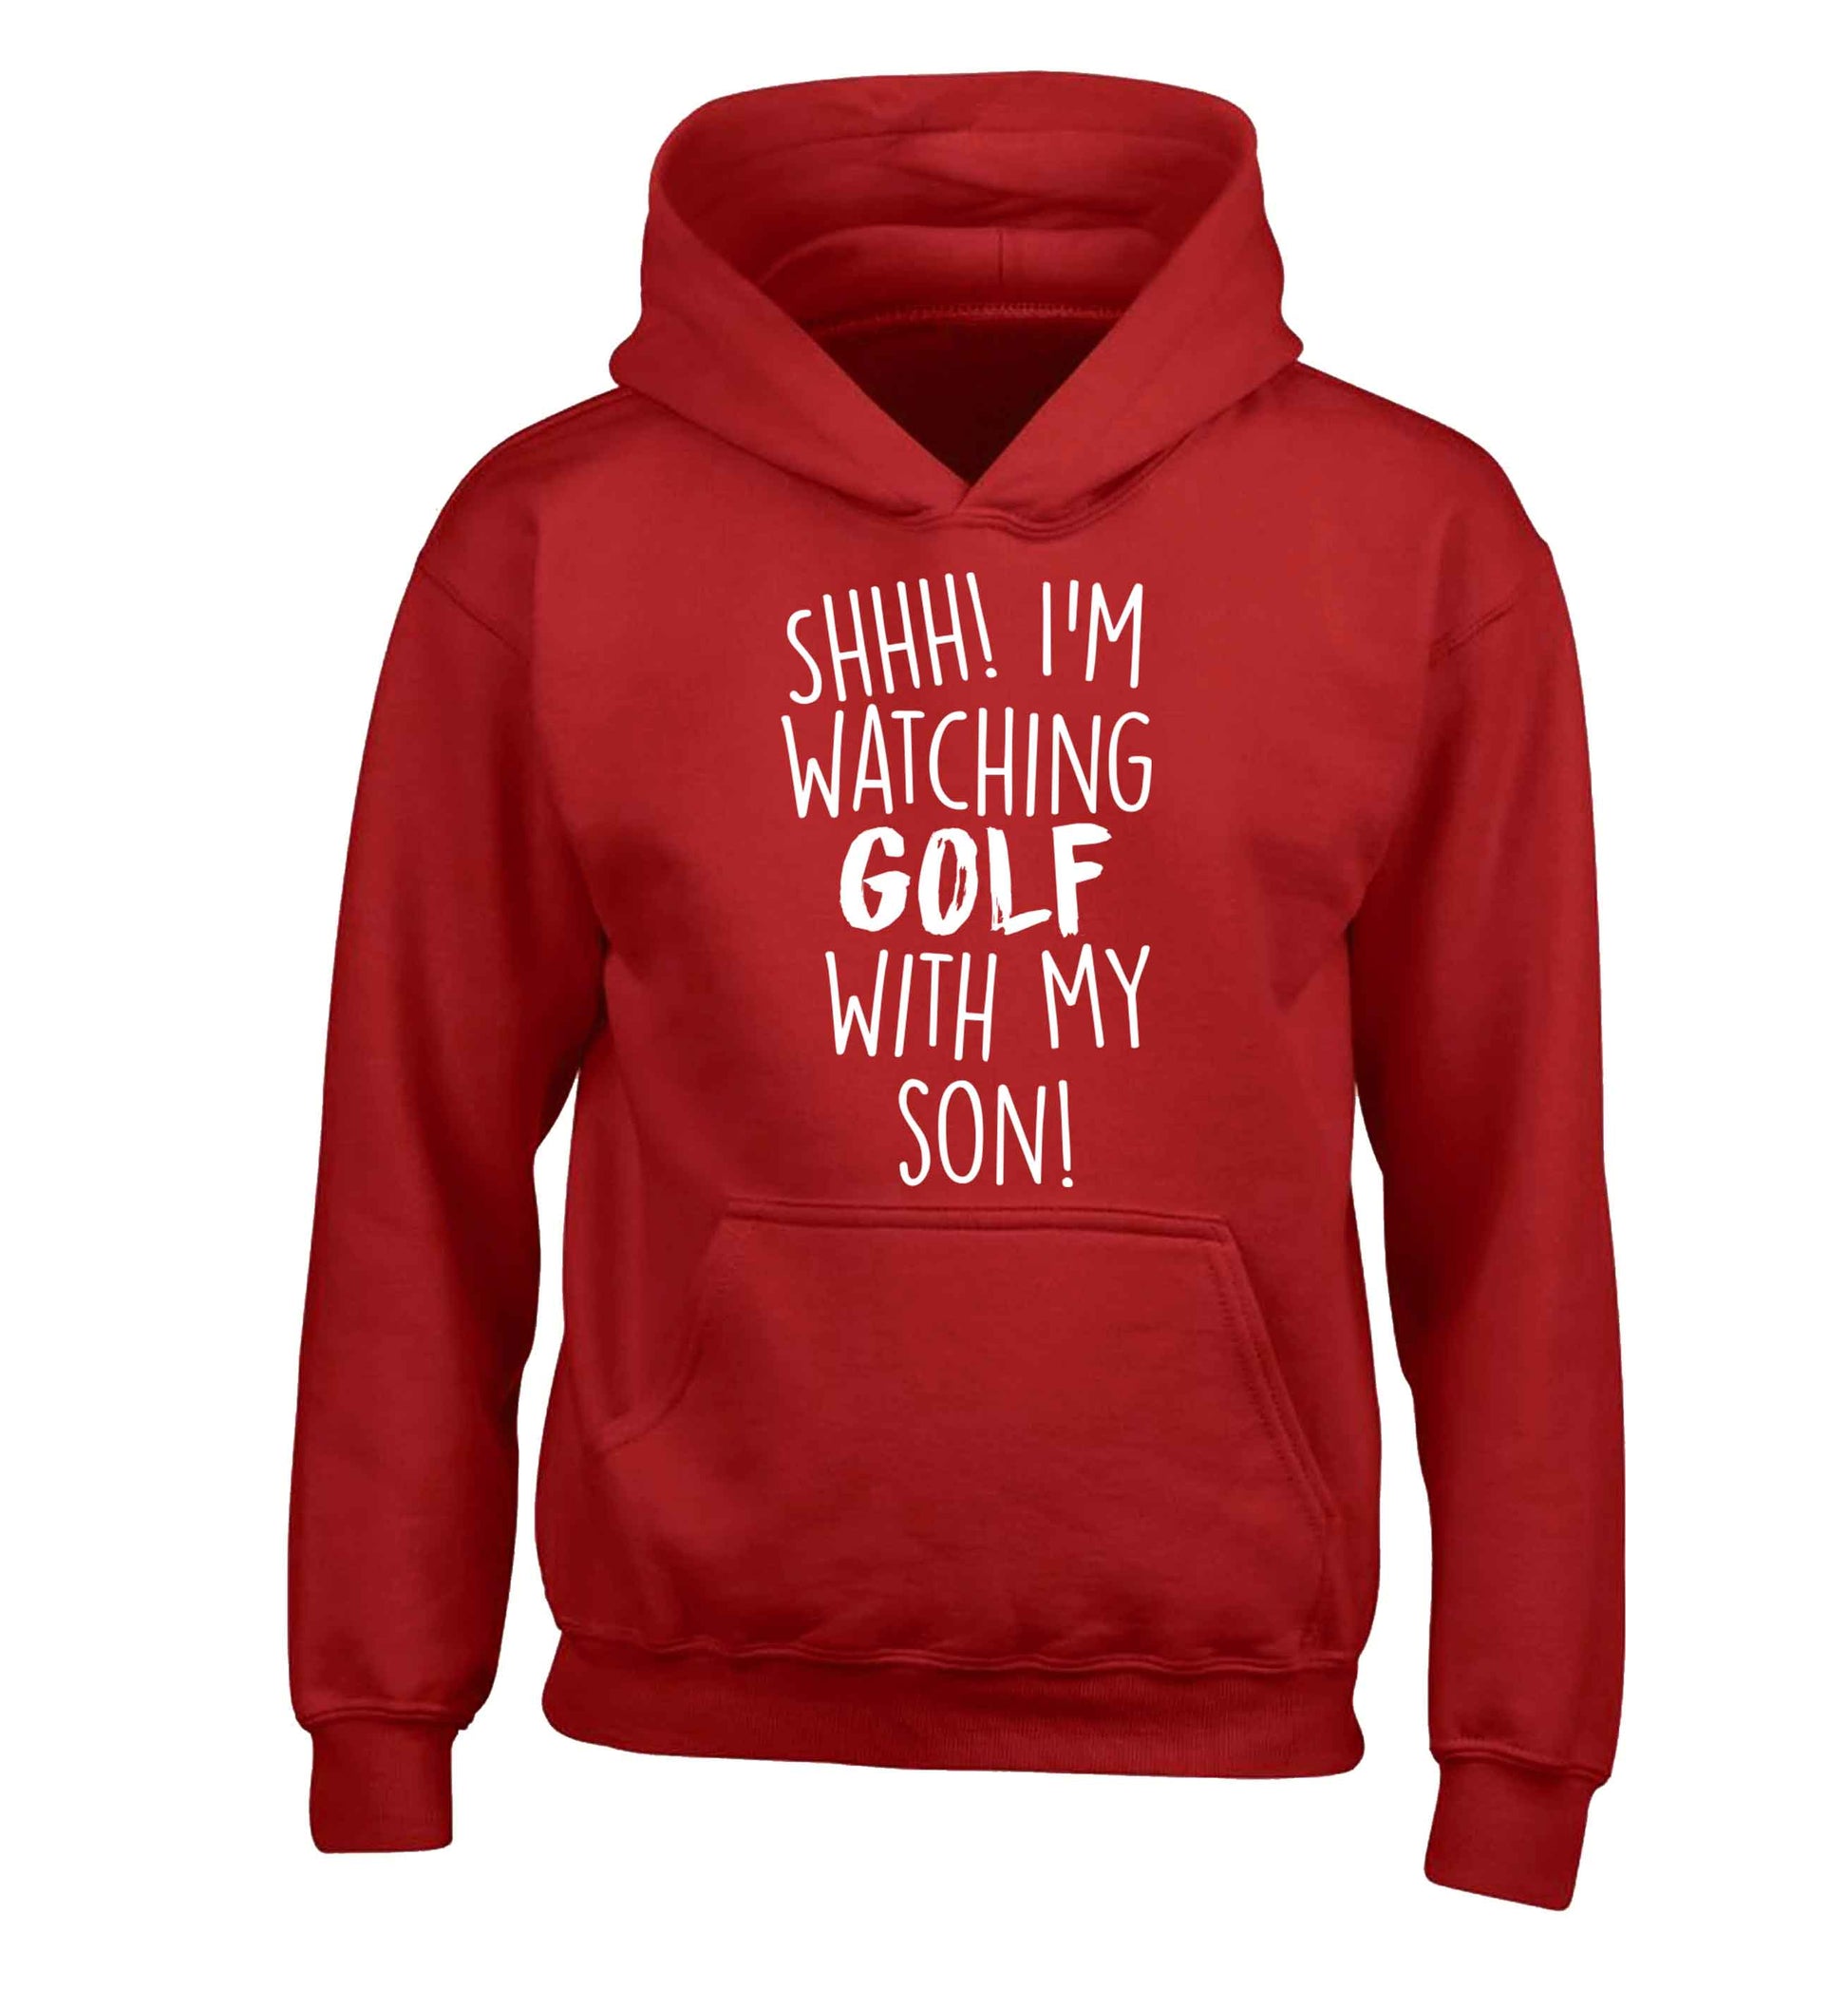 Shh I'm watching golf with my son children's red hoodie 12-13 Years